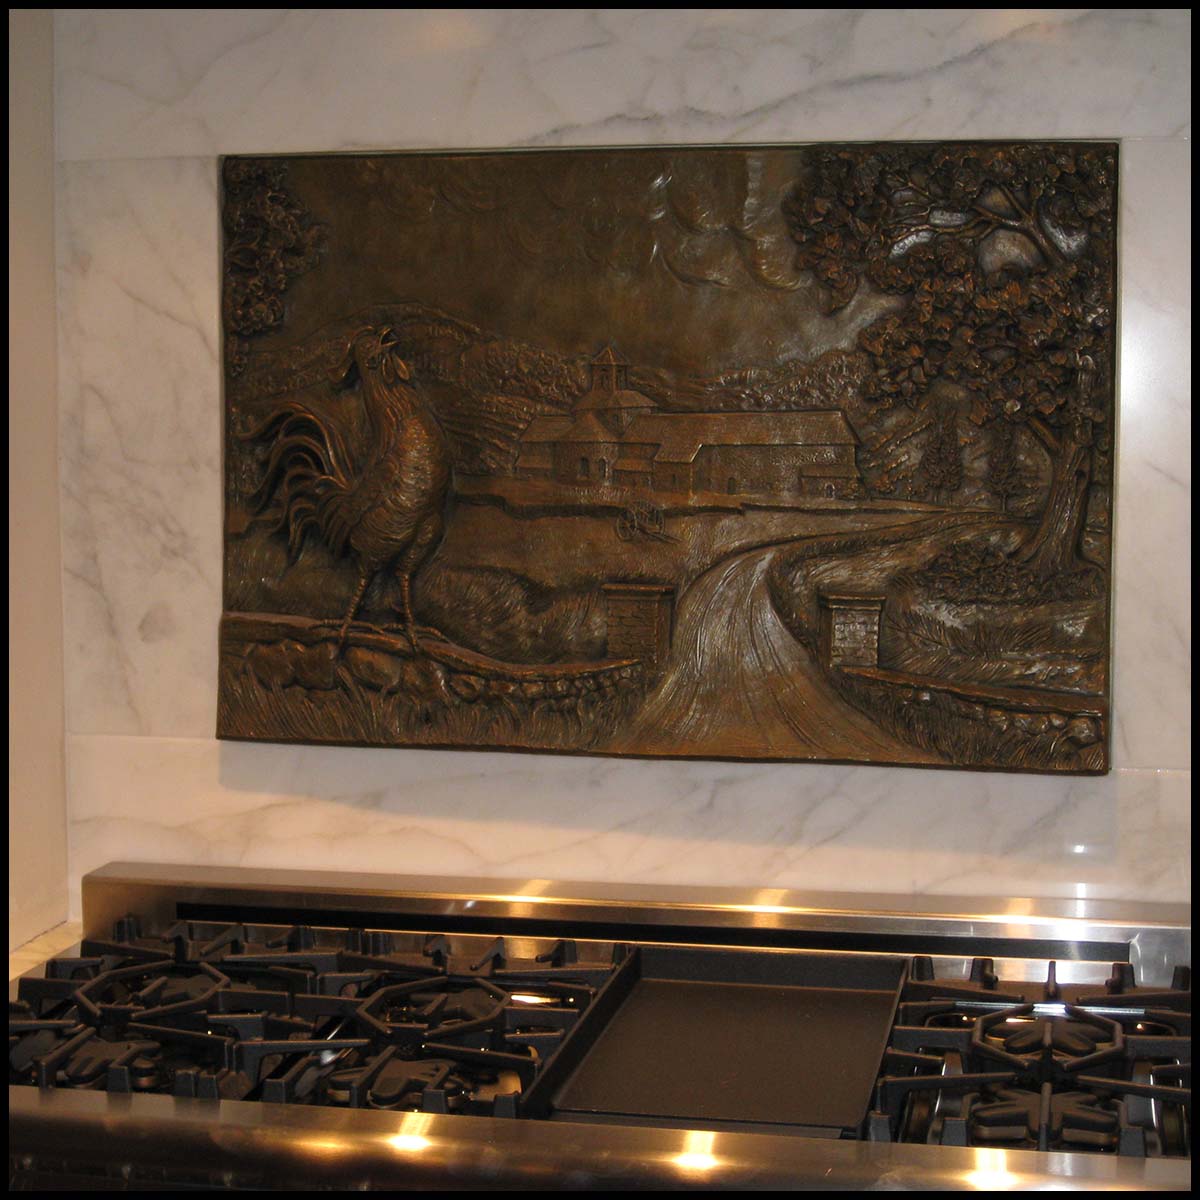 photo of bronze-colored relief plaque of farmhouse with rooster and tree in foreground mounted on tiled wall above kitchen stove